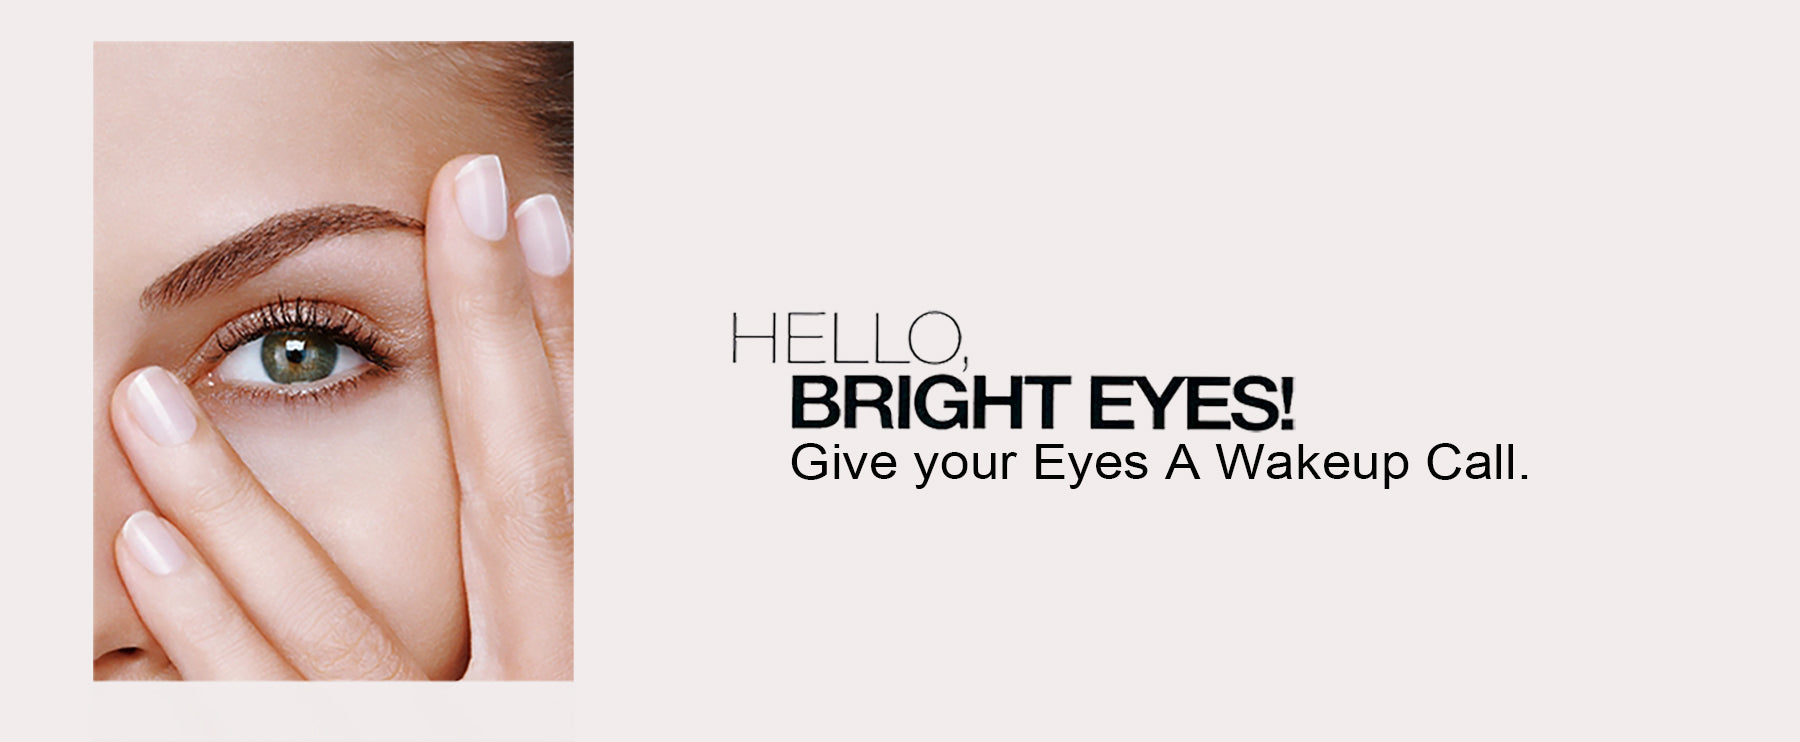 Dominique Bossavy – Hello, Bright Eyes! Give your Eyes a Wakeup Call.